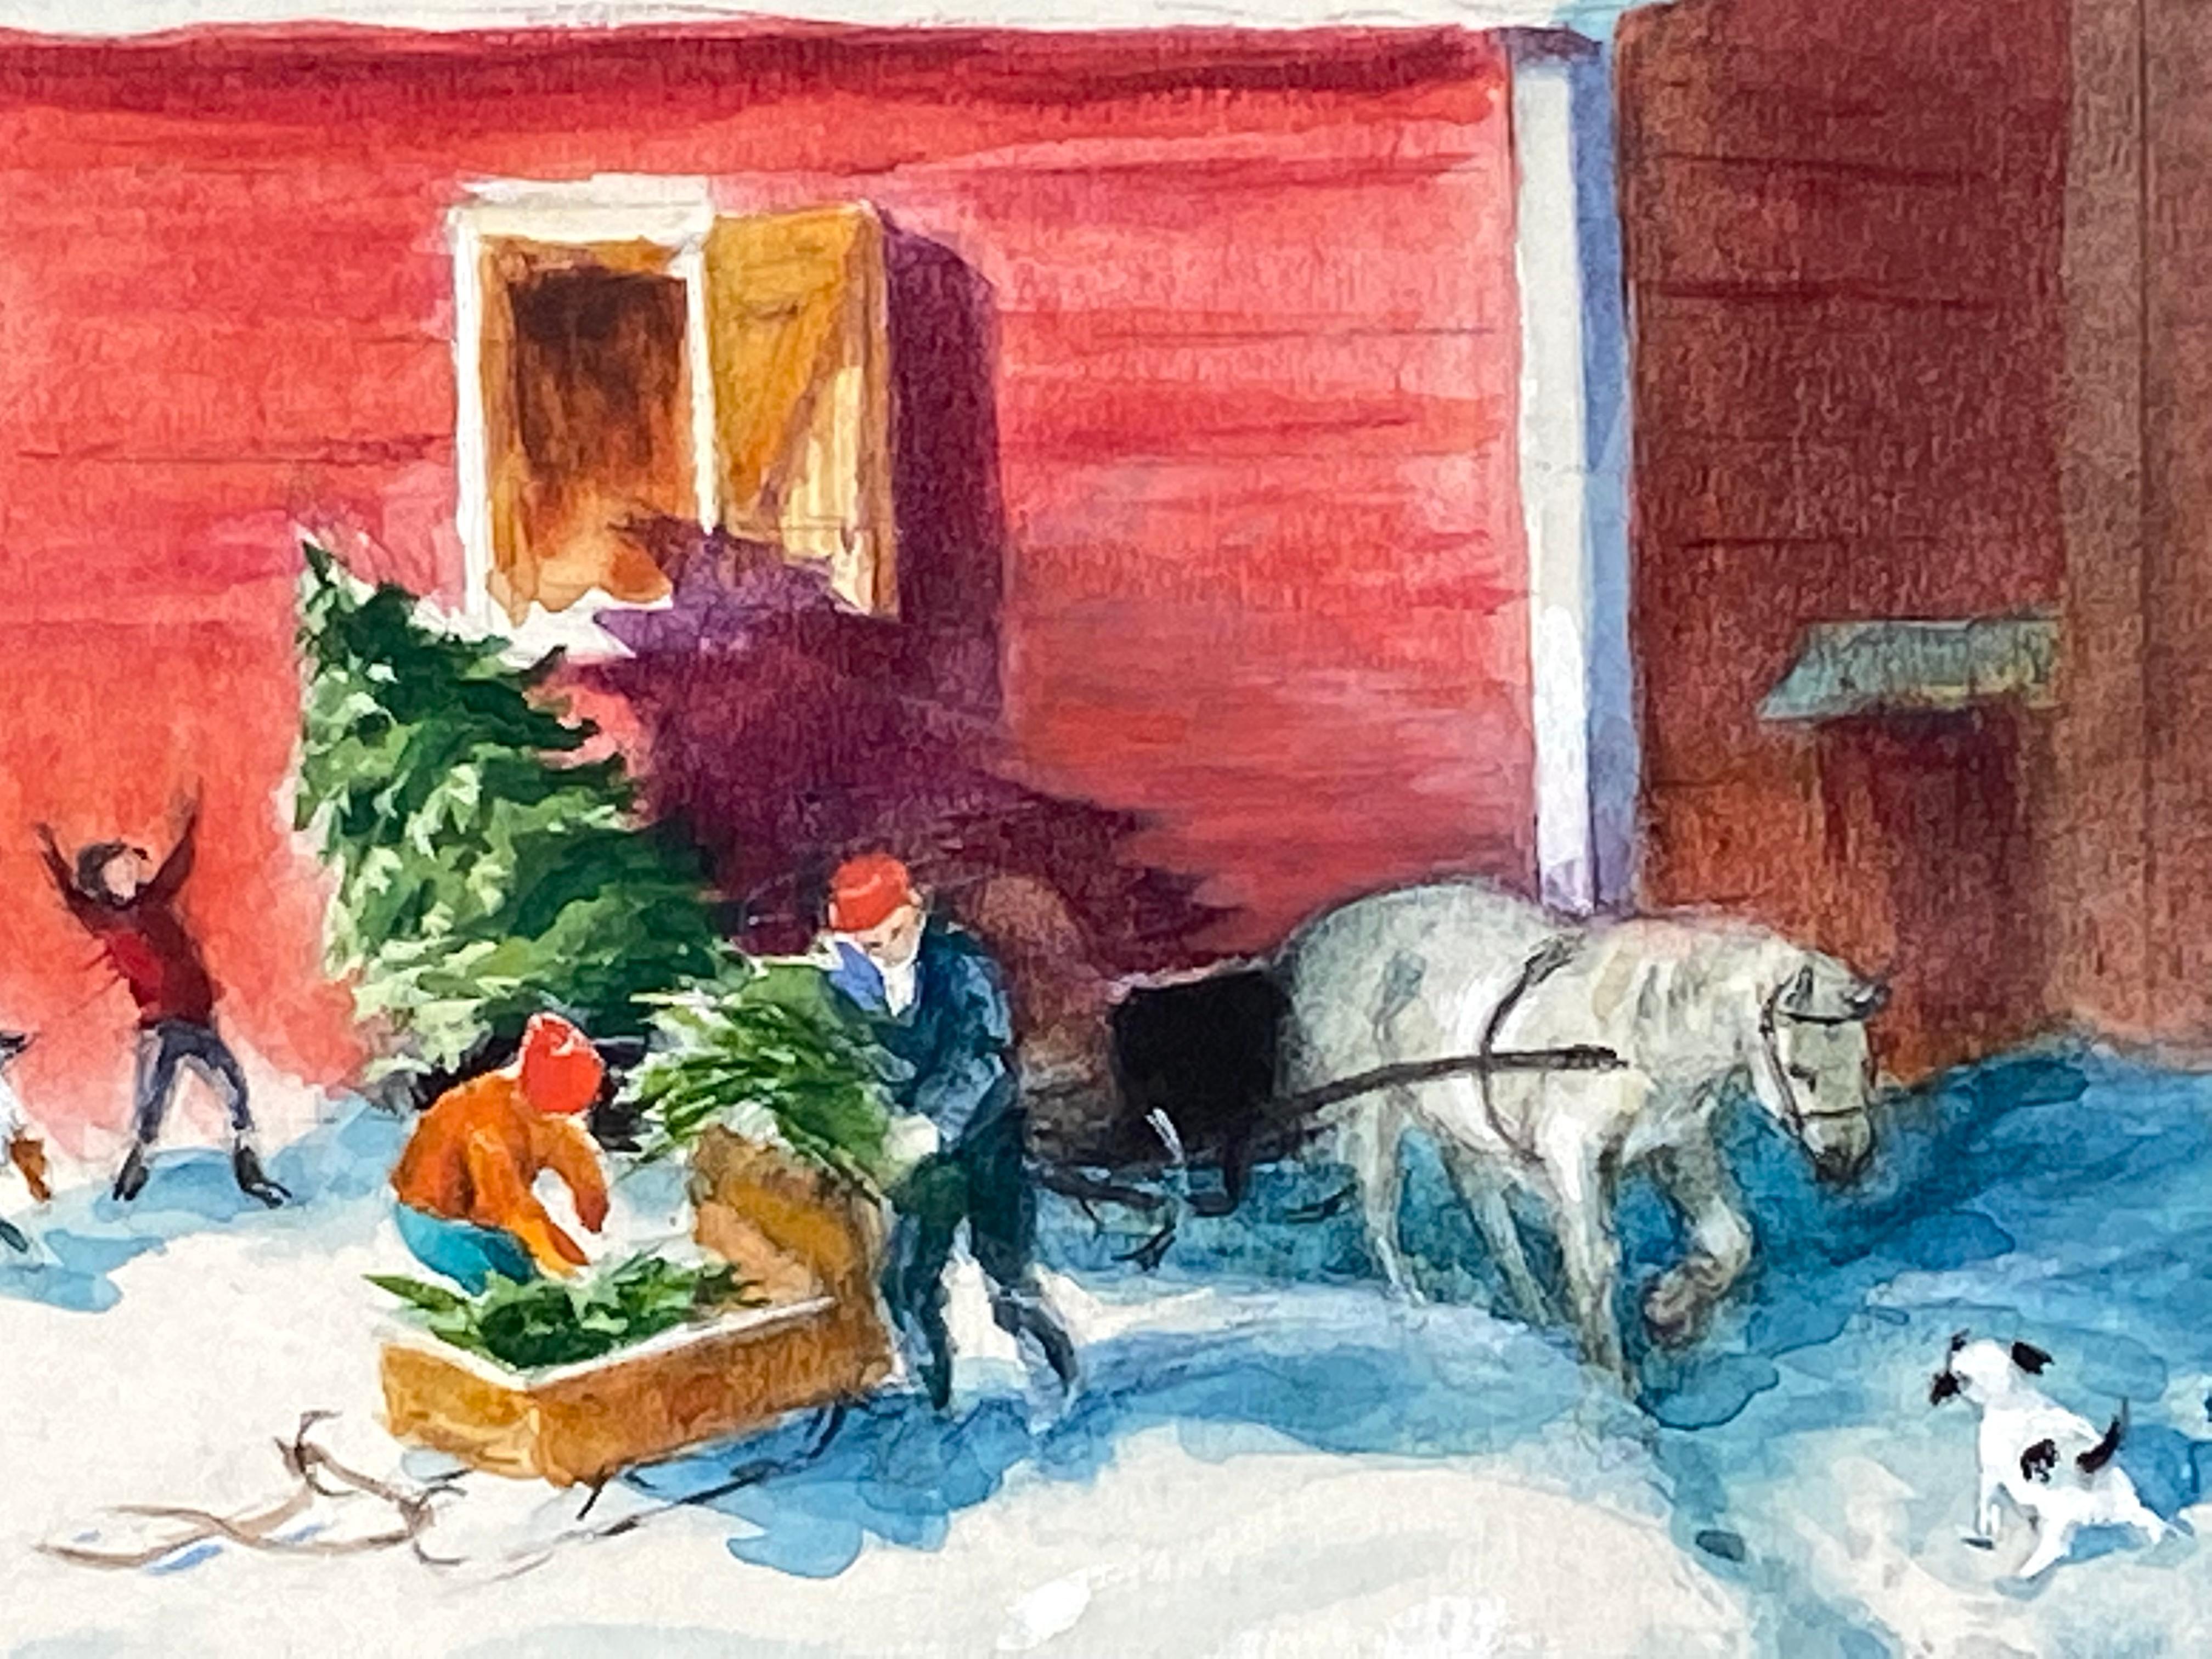 “Holiday Season” - Contemporary Art by Louise Clasper Rumely